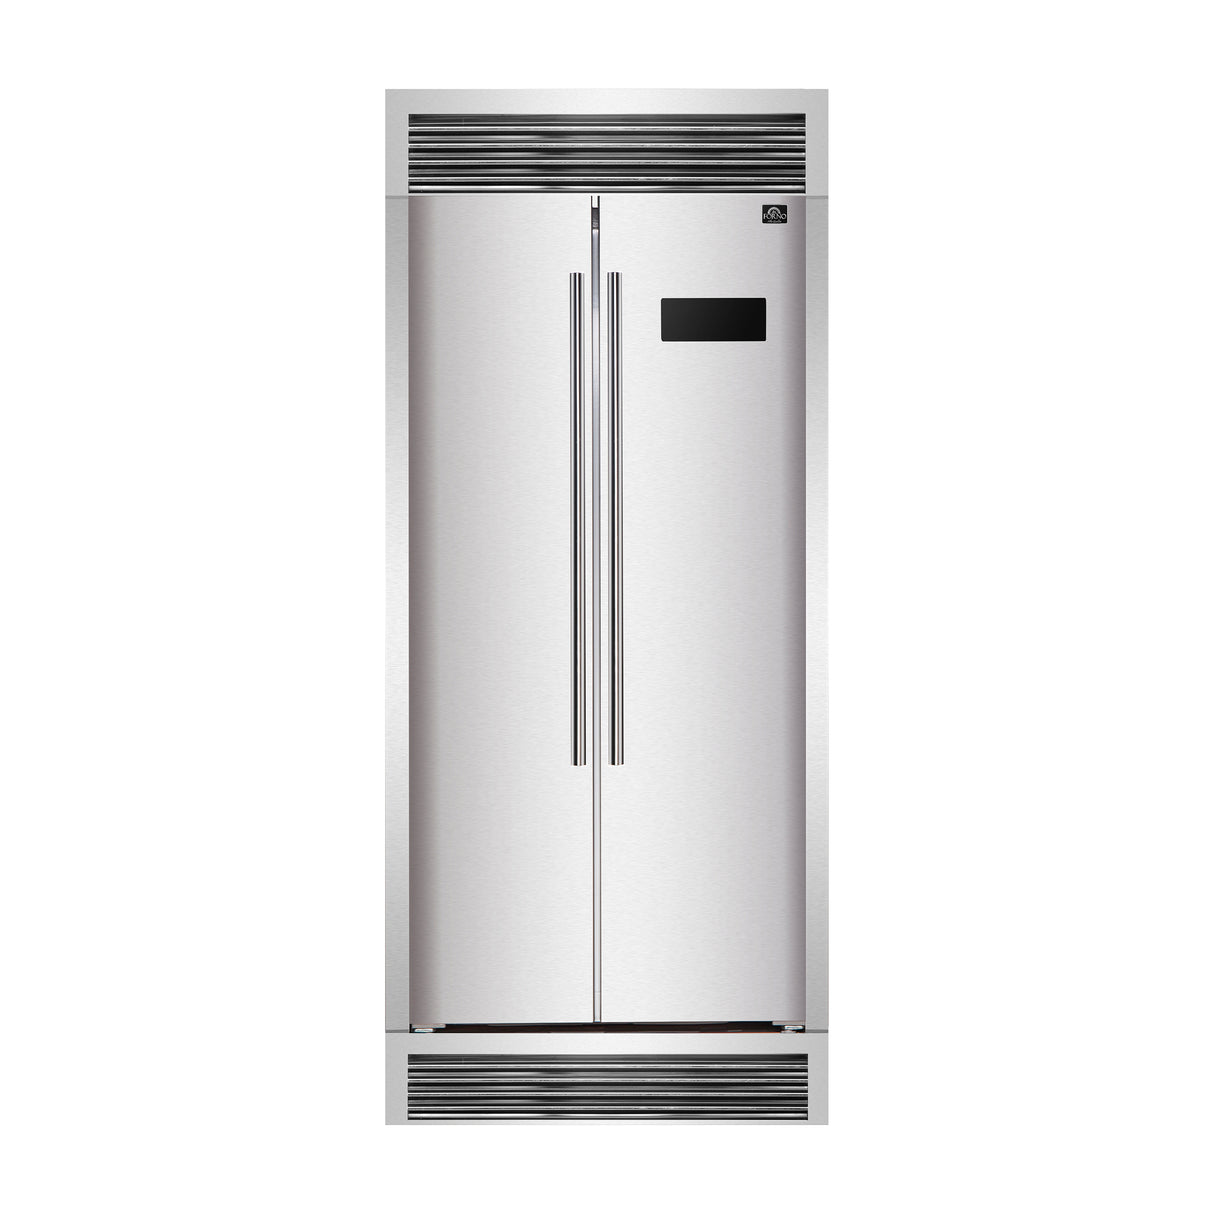 Forno Salerno 33" Side-by-Side Refrigerator in Stainless Steel with 4” Decorative Grill - 15.6 cu. ft.